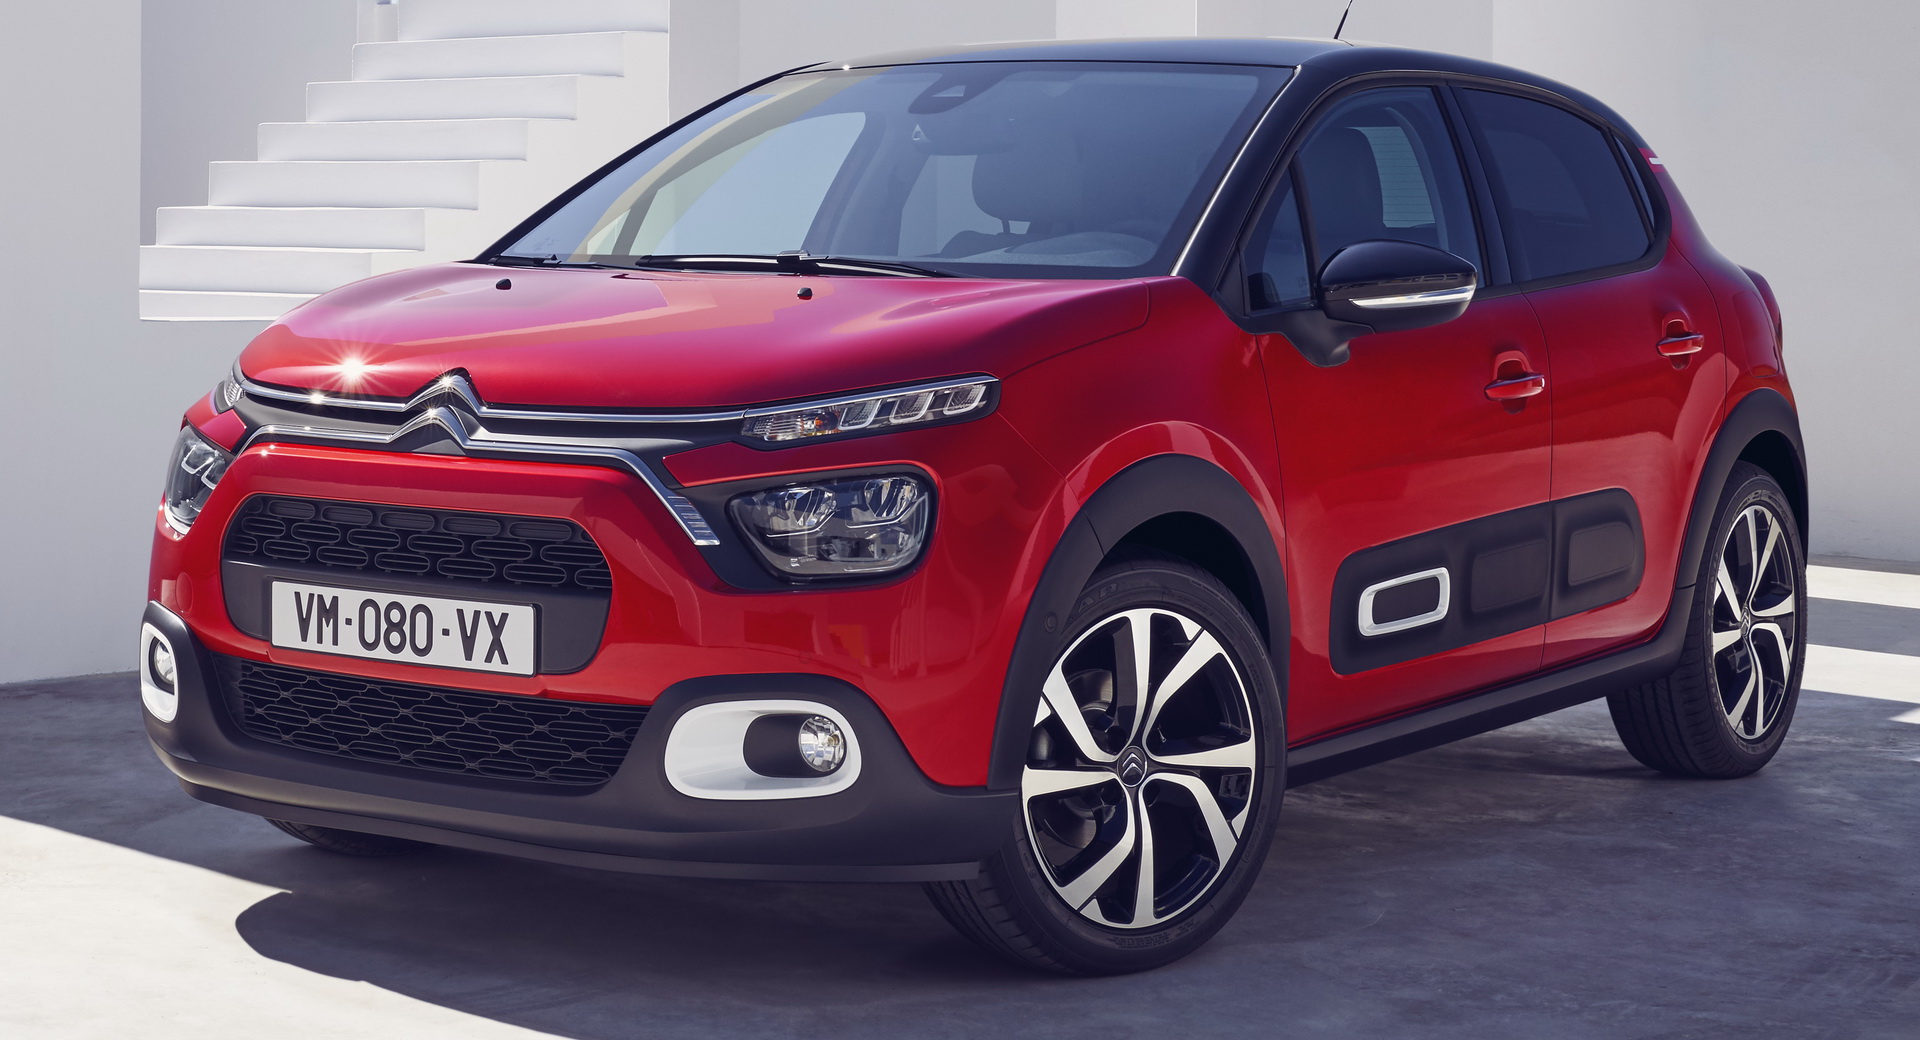 2020 Citroen C3 Facelift Breaks Cover With Revised Styling And